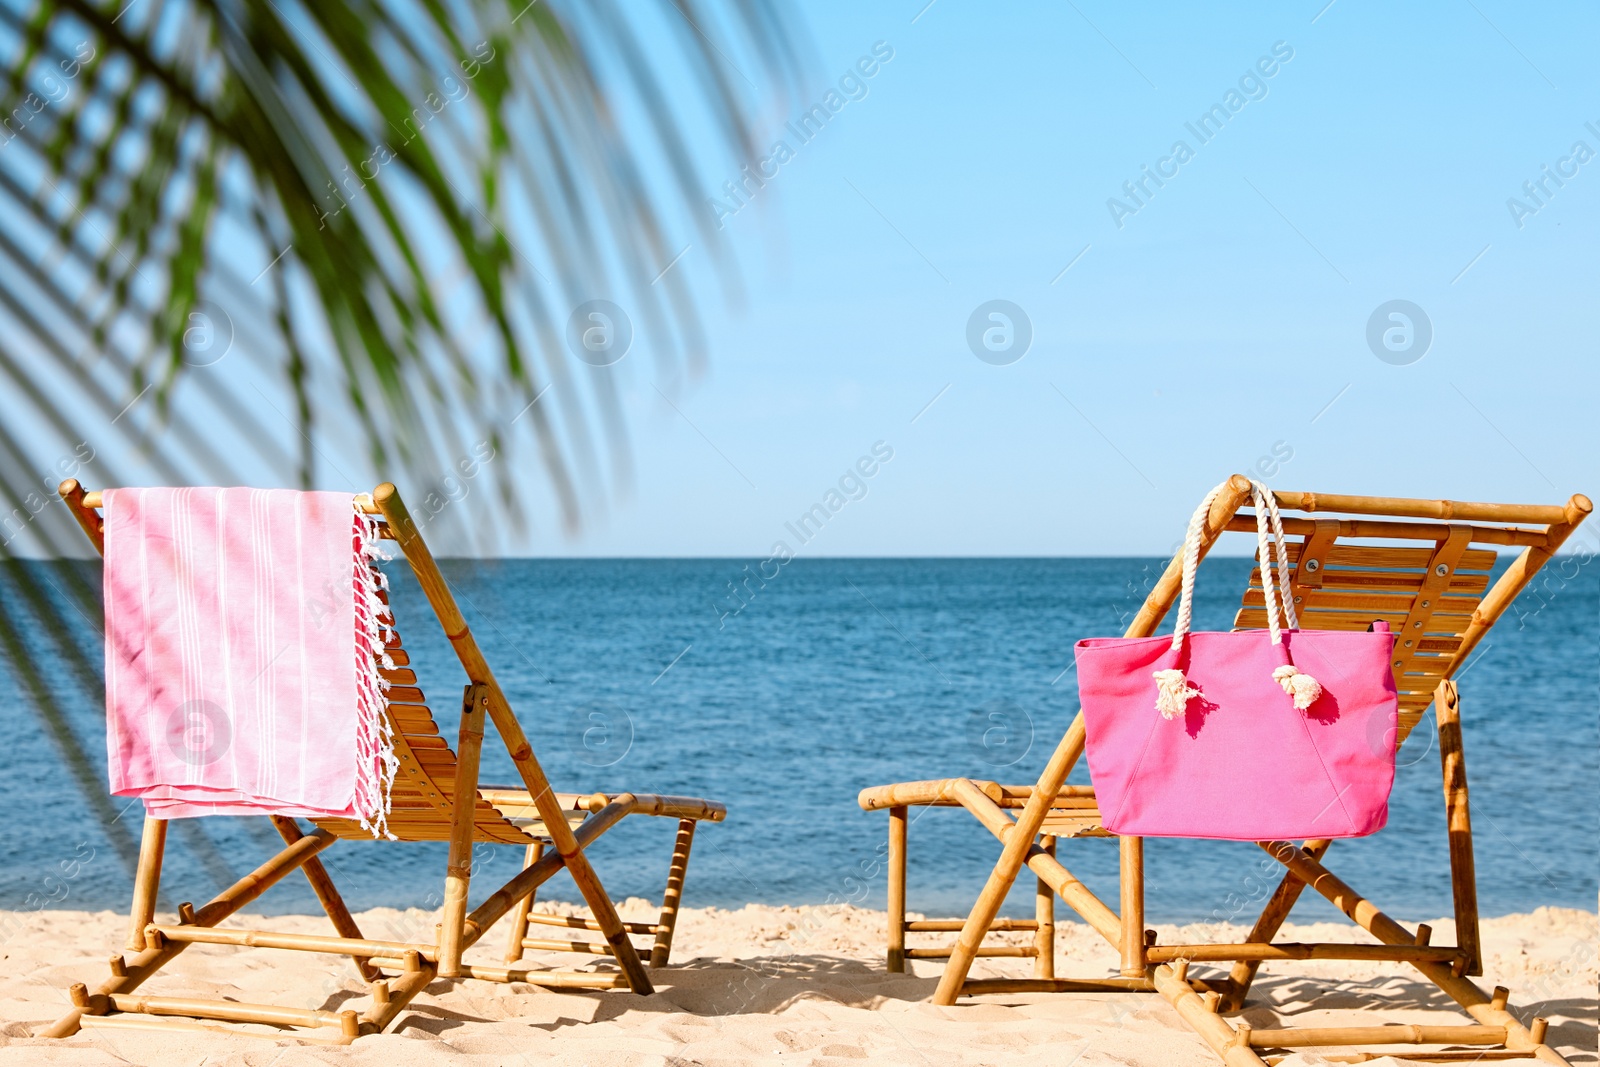 Photo of Empty wooden sunbeds and beach accessories on sandy shore